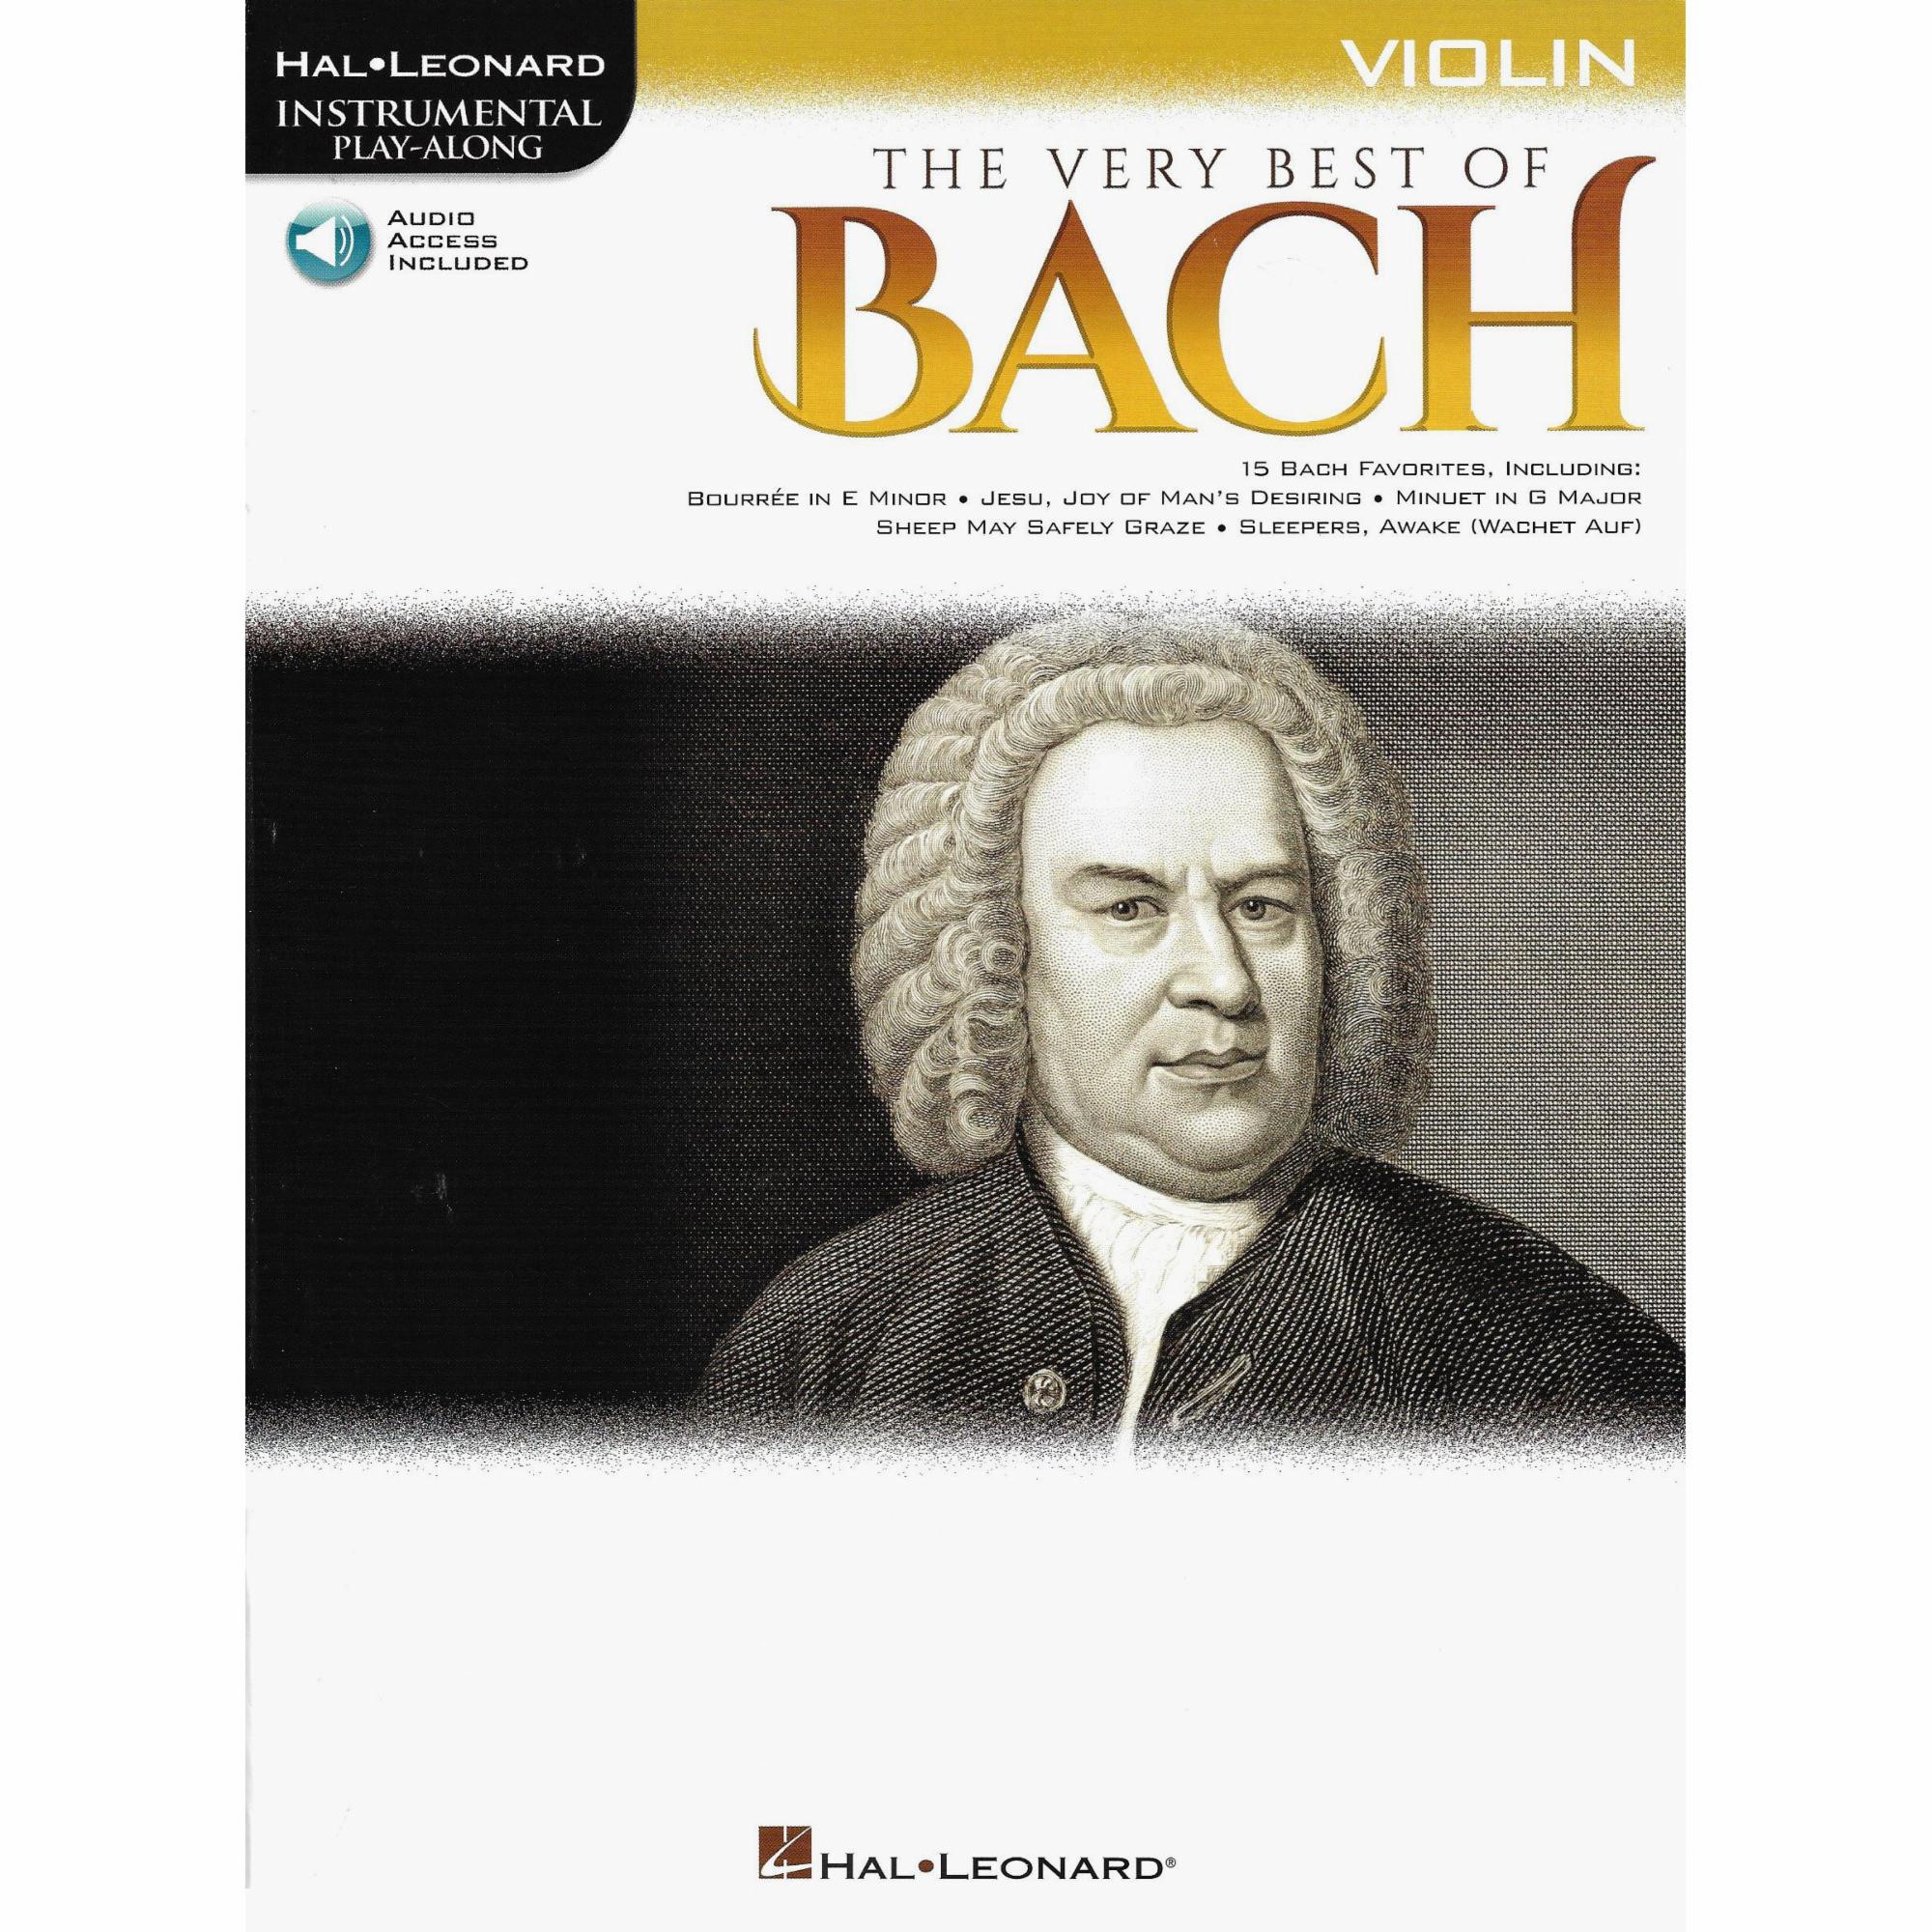 The Very Best of Bach for Violin, Viola, or Cello